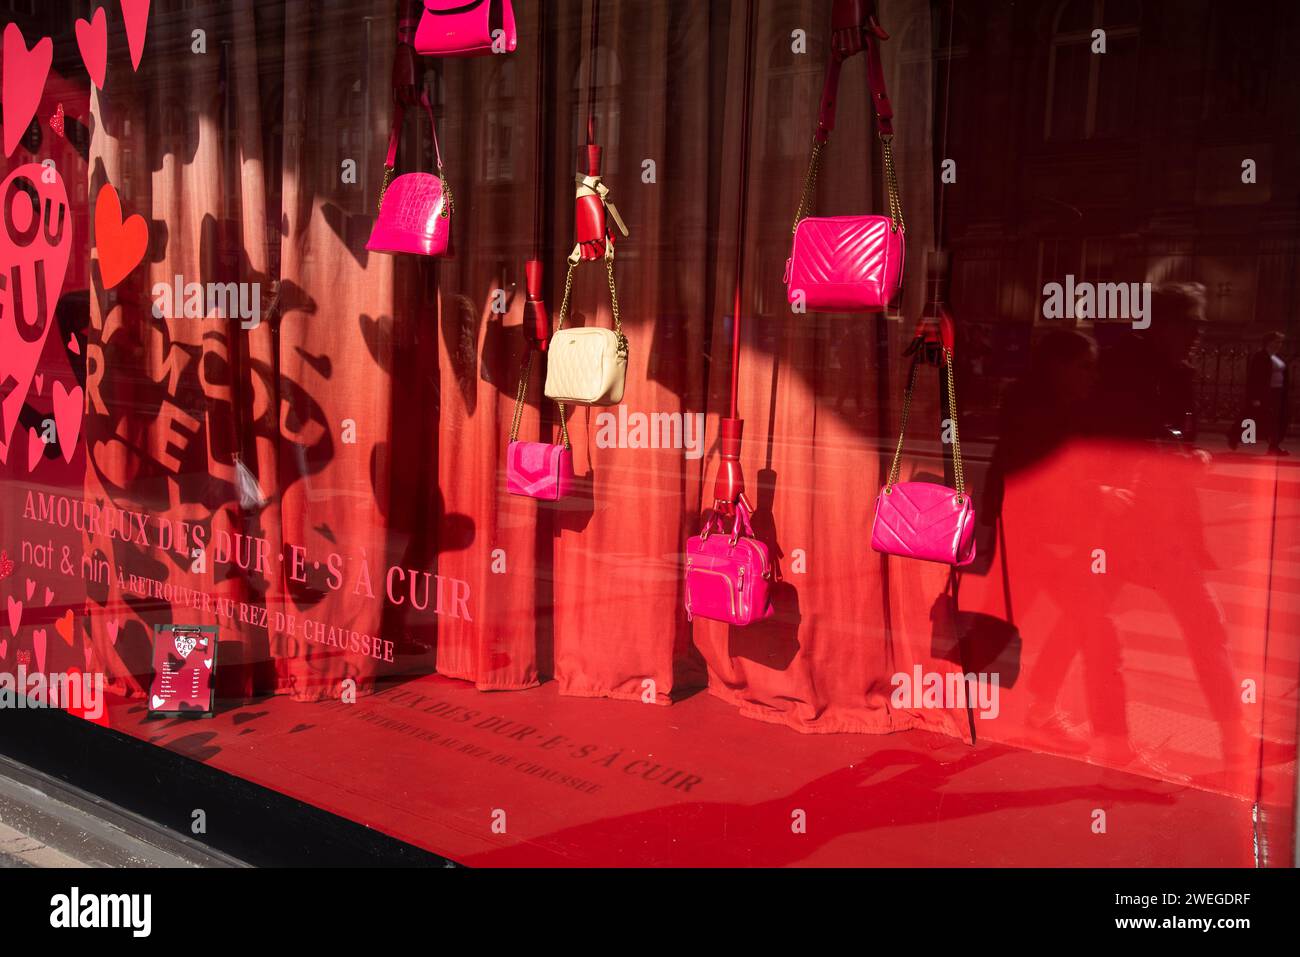 Paris, France - February 21, 2023: Valentine red decoration with hearts as background for fancy handbags displayed in window of BHV department store. Stock Photo